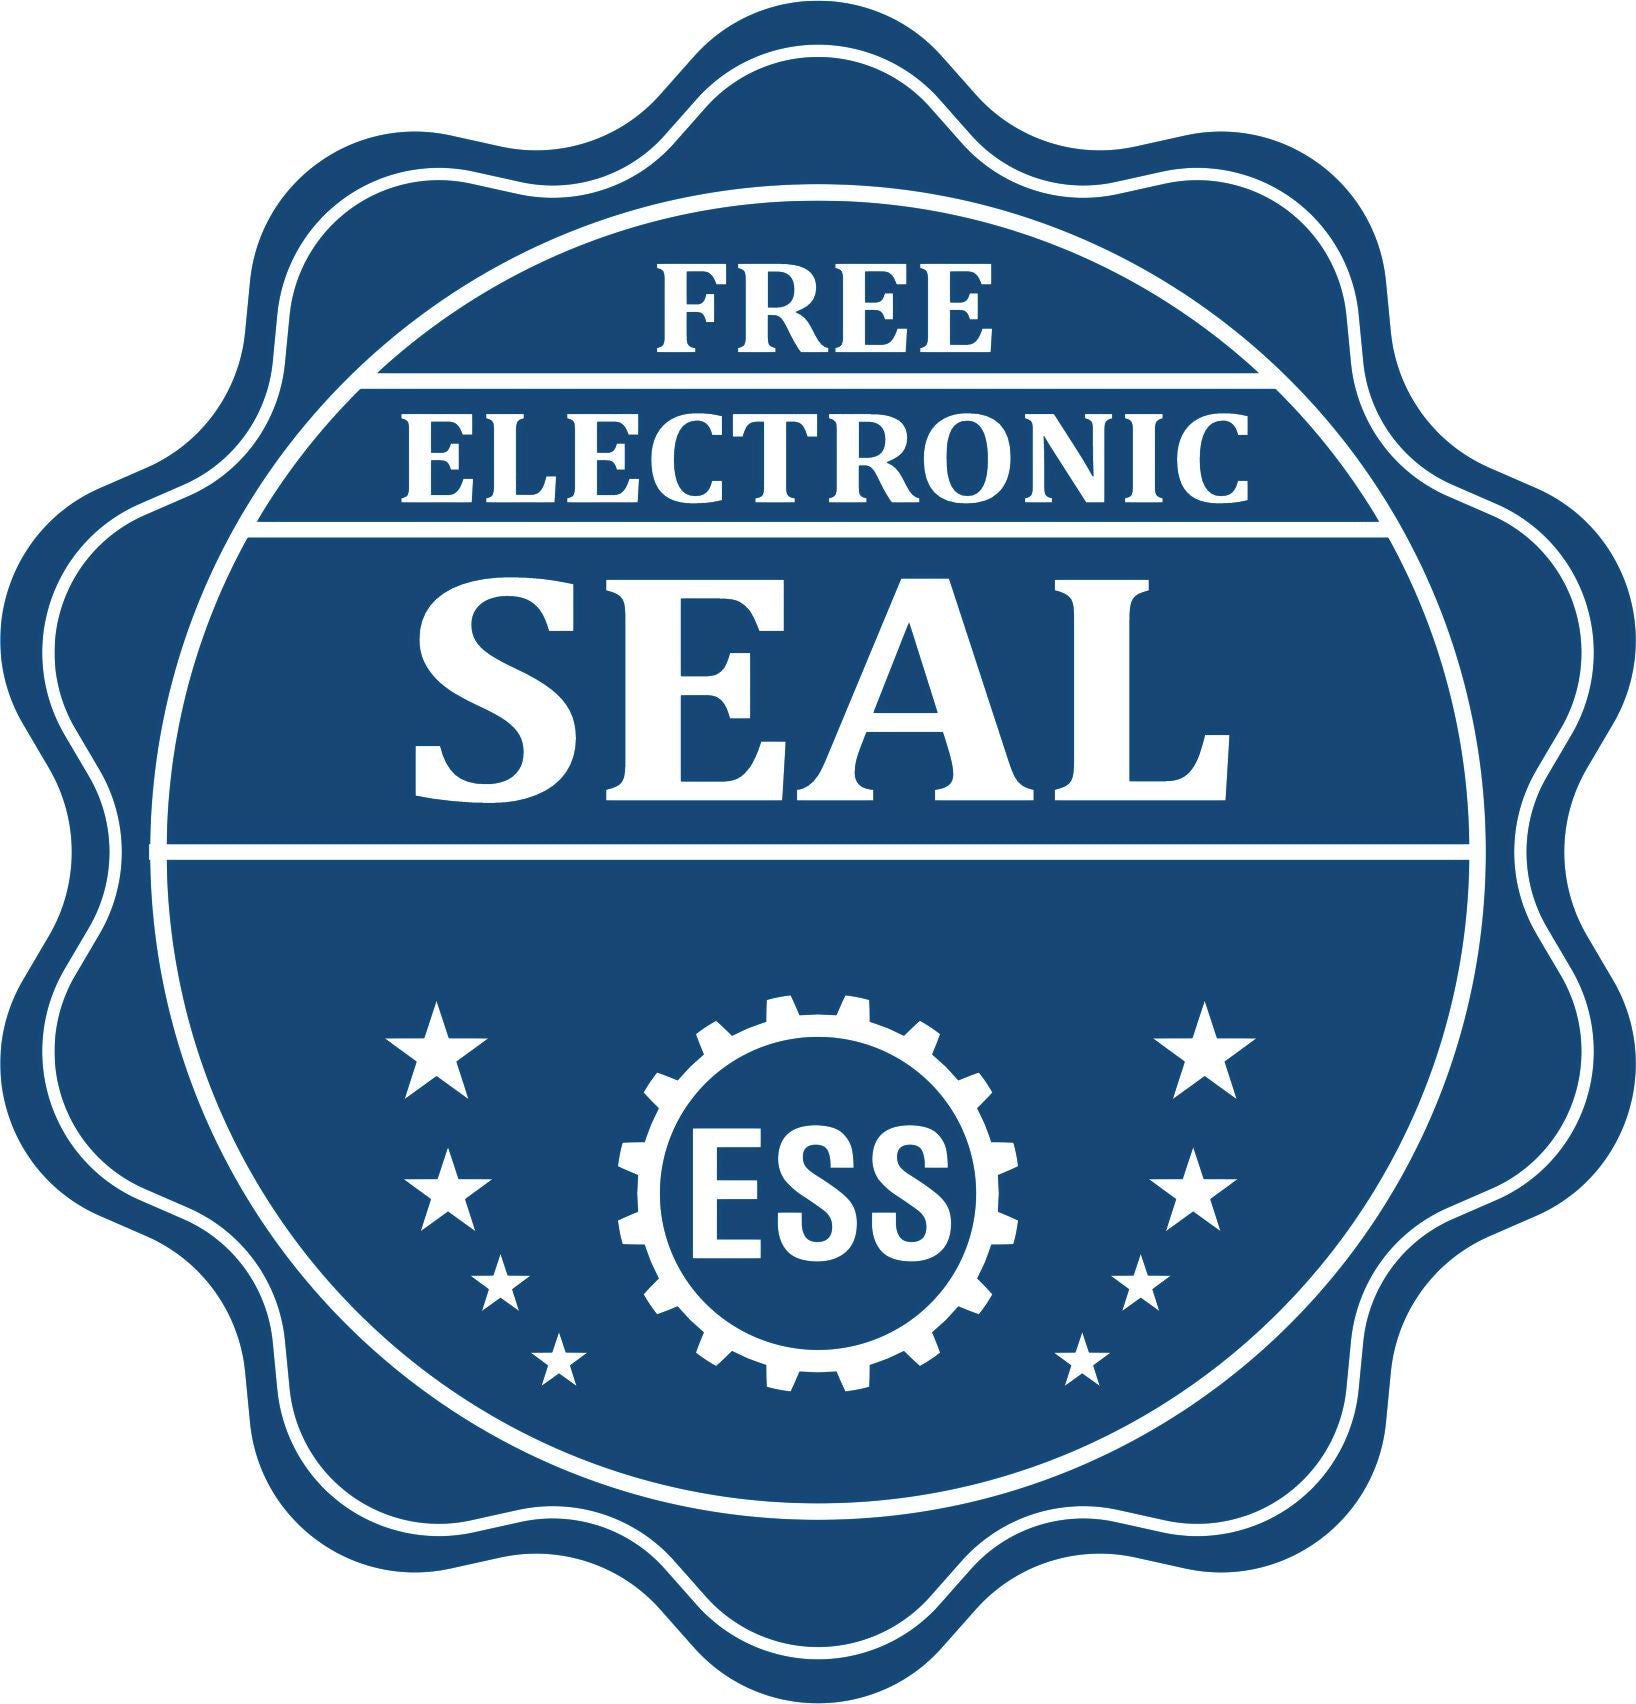 A badge showing a free electronic seal for the Hybrid Delaware Landscape Architect Seal with stars and the ESS gear on the emblem.